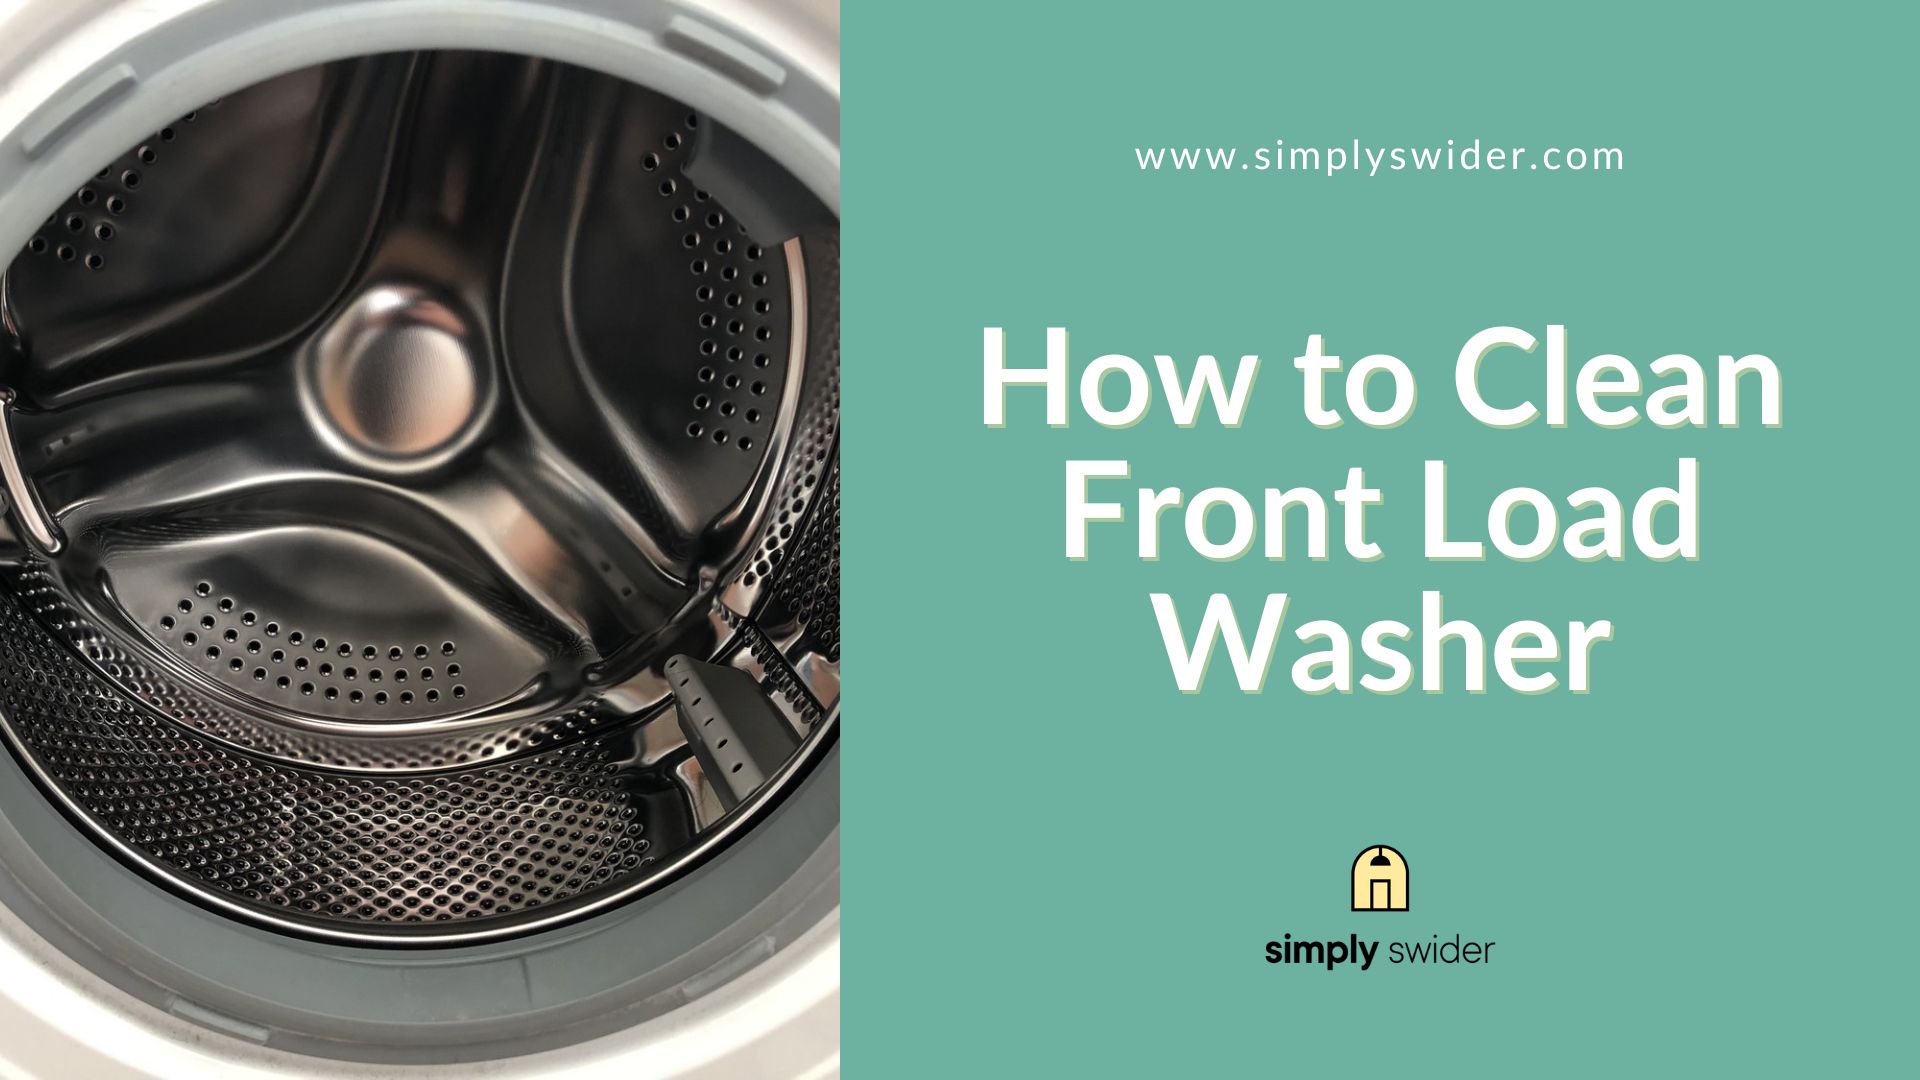 How to Clean Front Load Washer